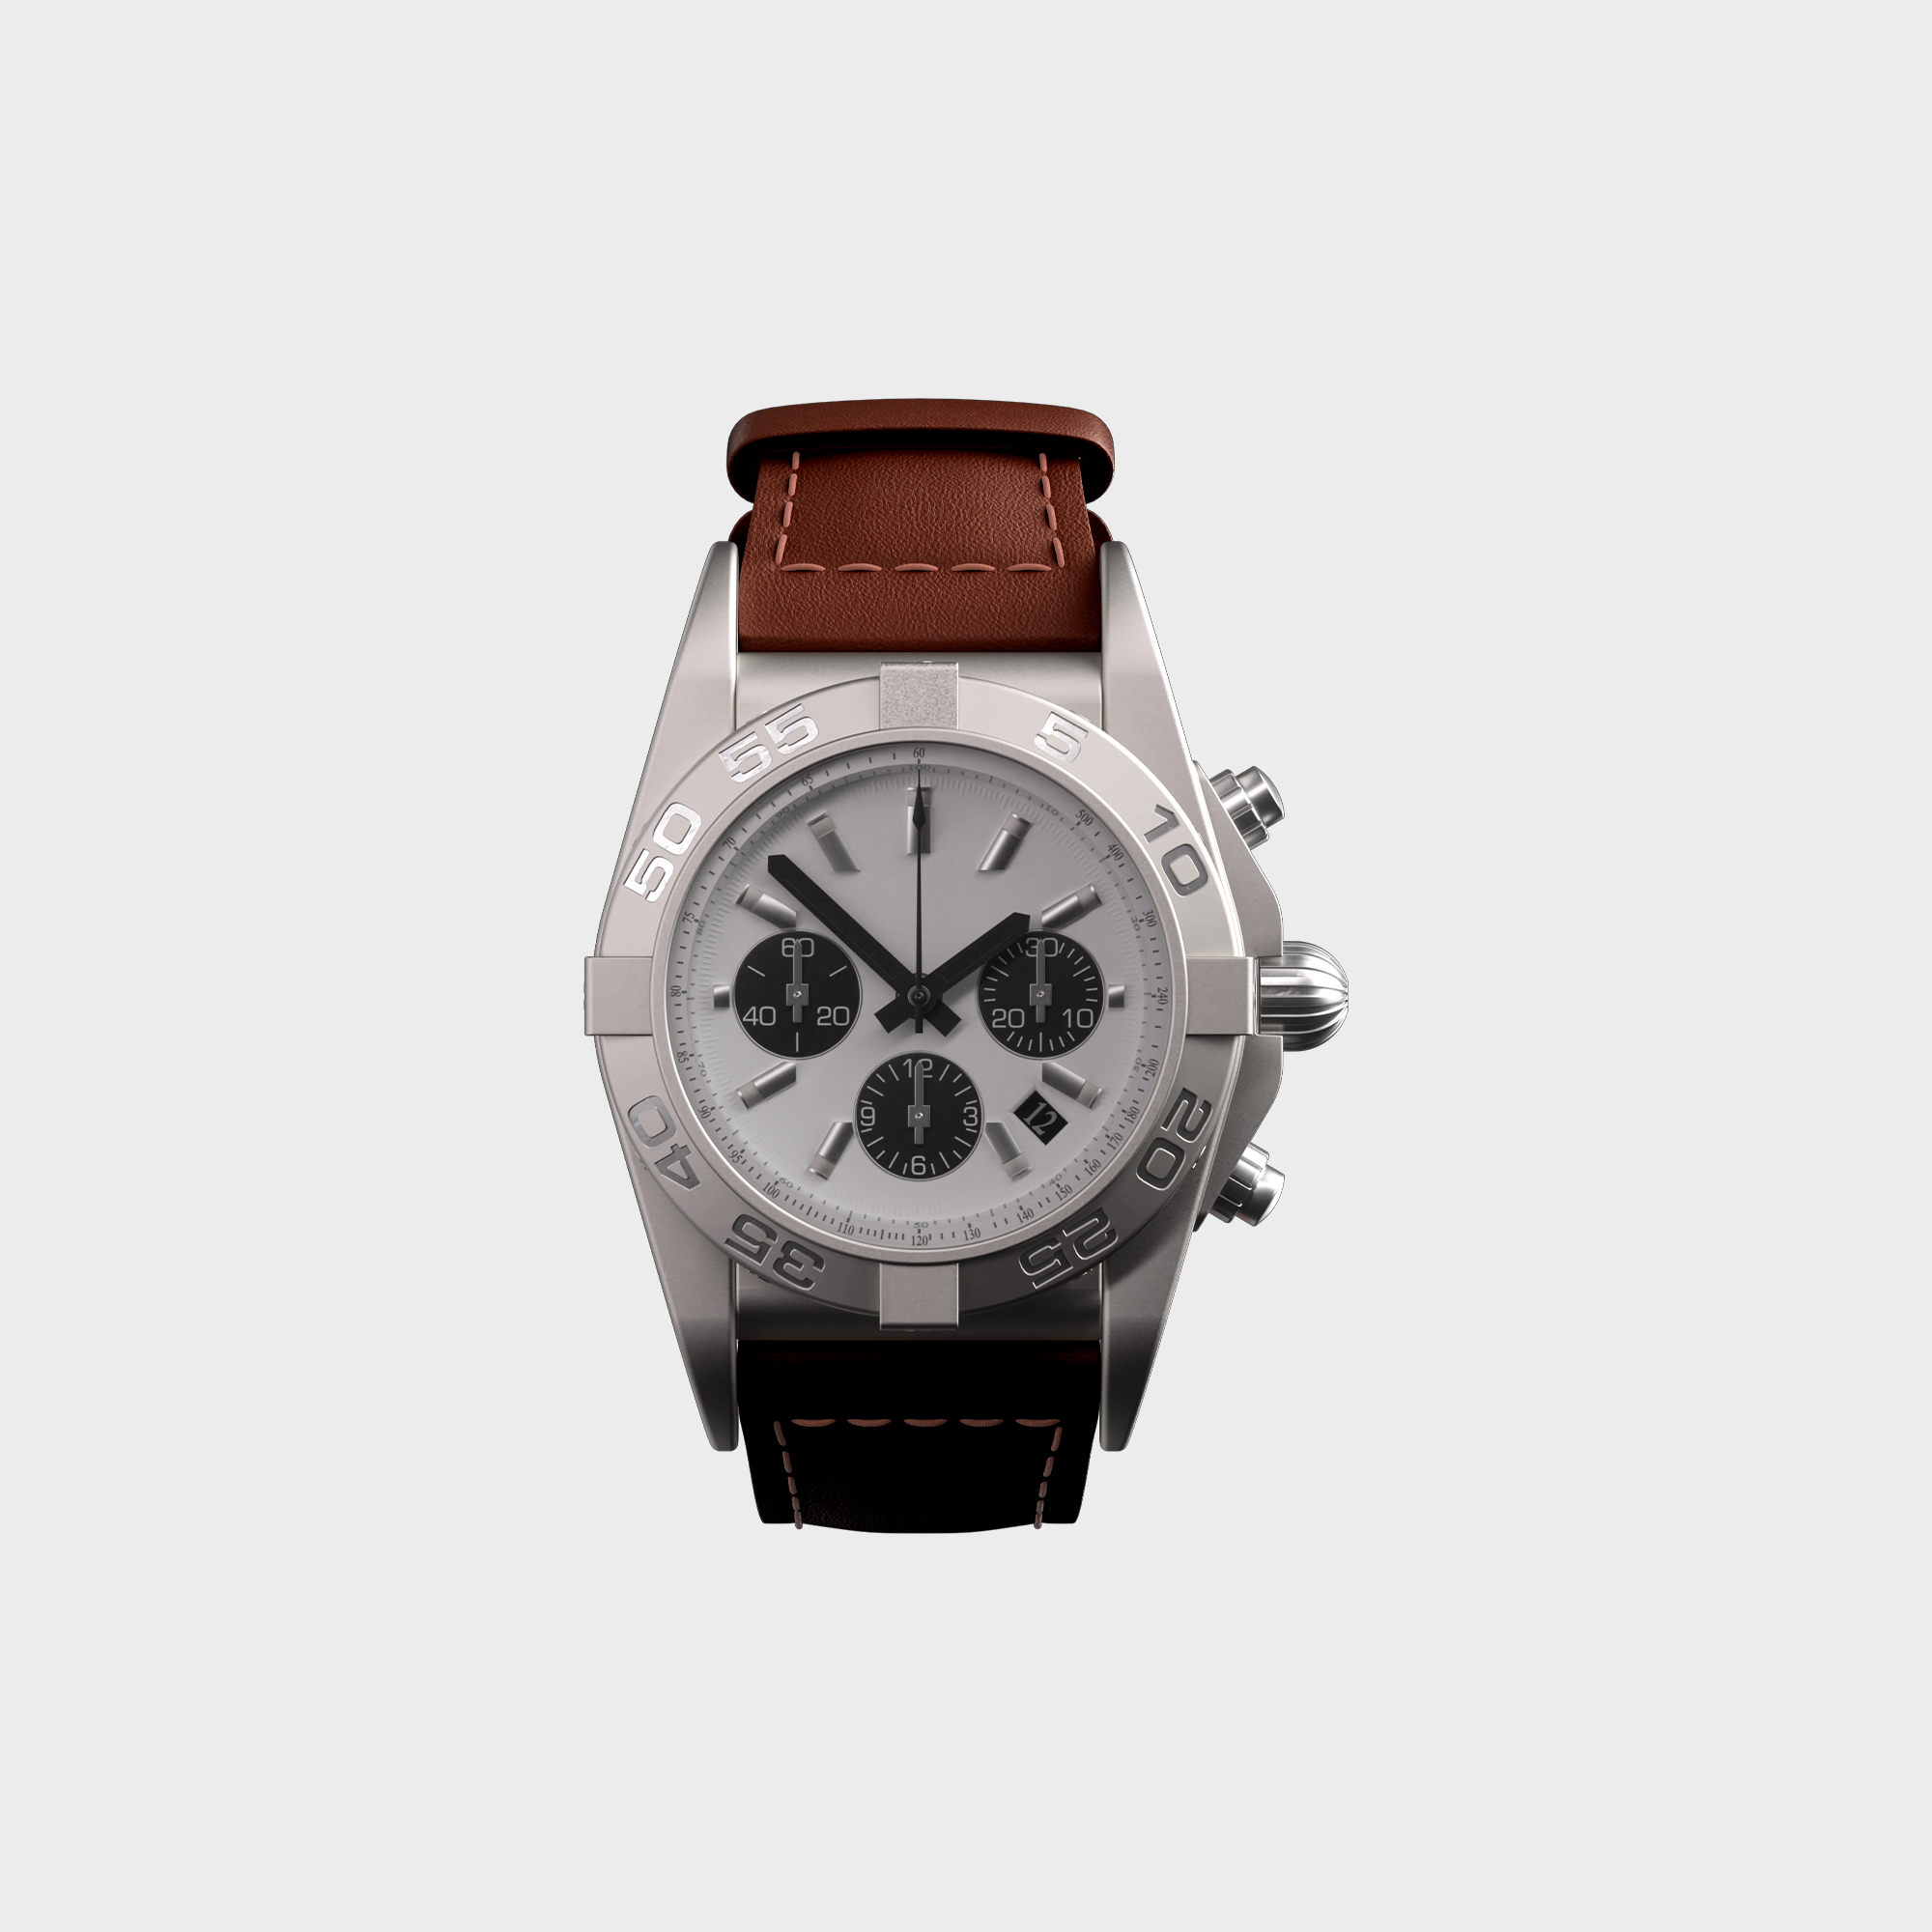 Stainless steel chronograph watch with brown leather strap on white background.